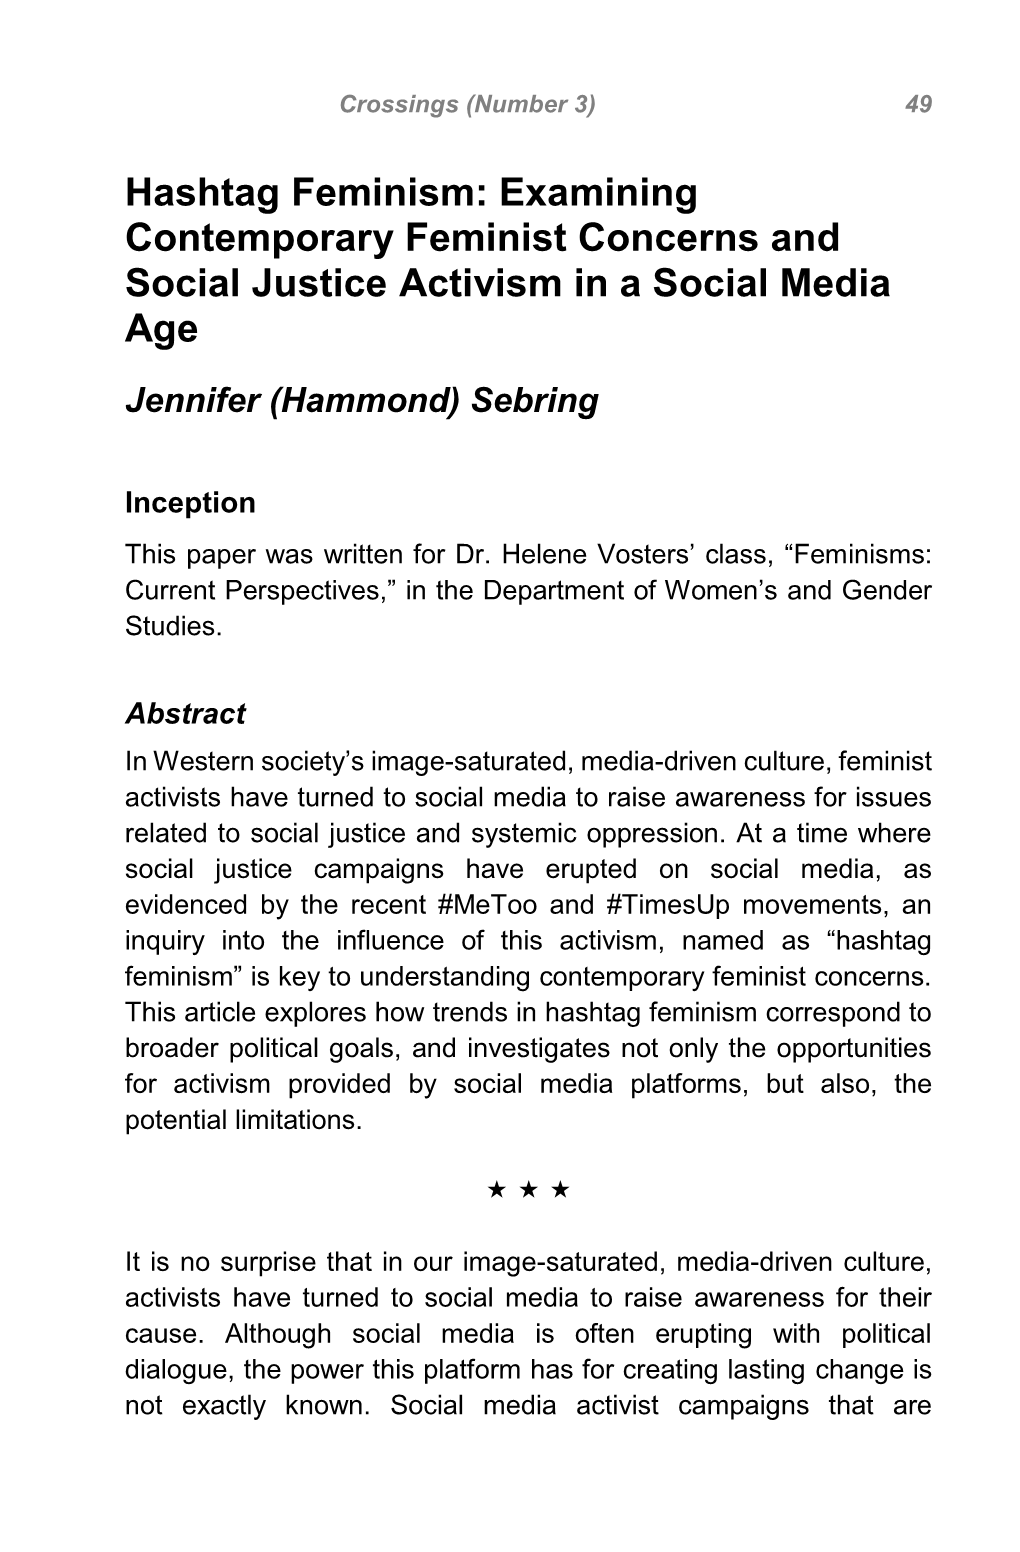 Hashtag Feminism: Examining Contemporary Feminist Concerns and Social Justice Activism in a Social Media Age